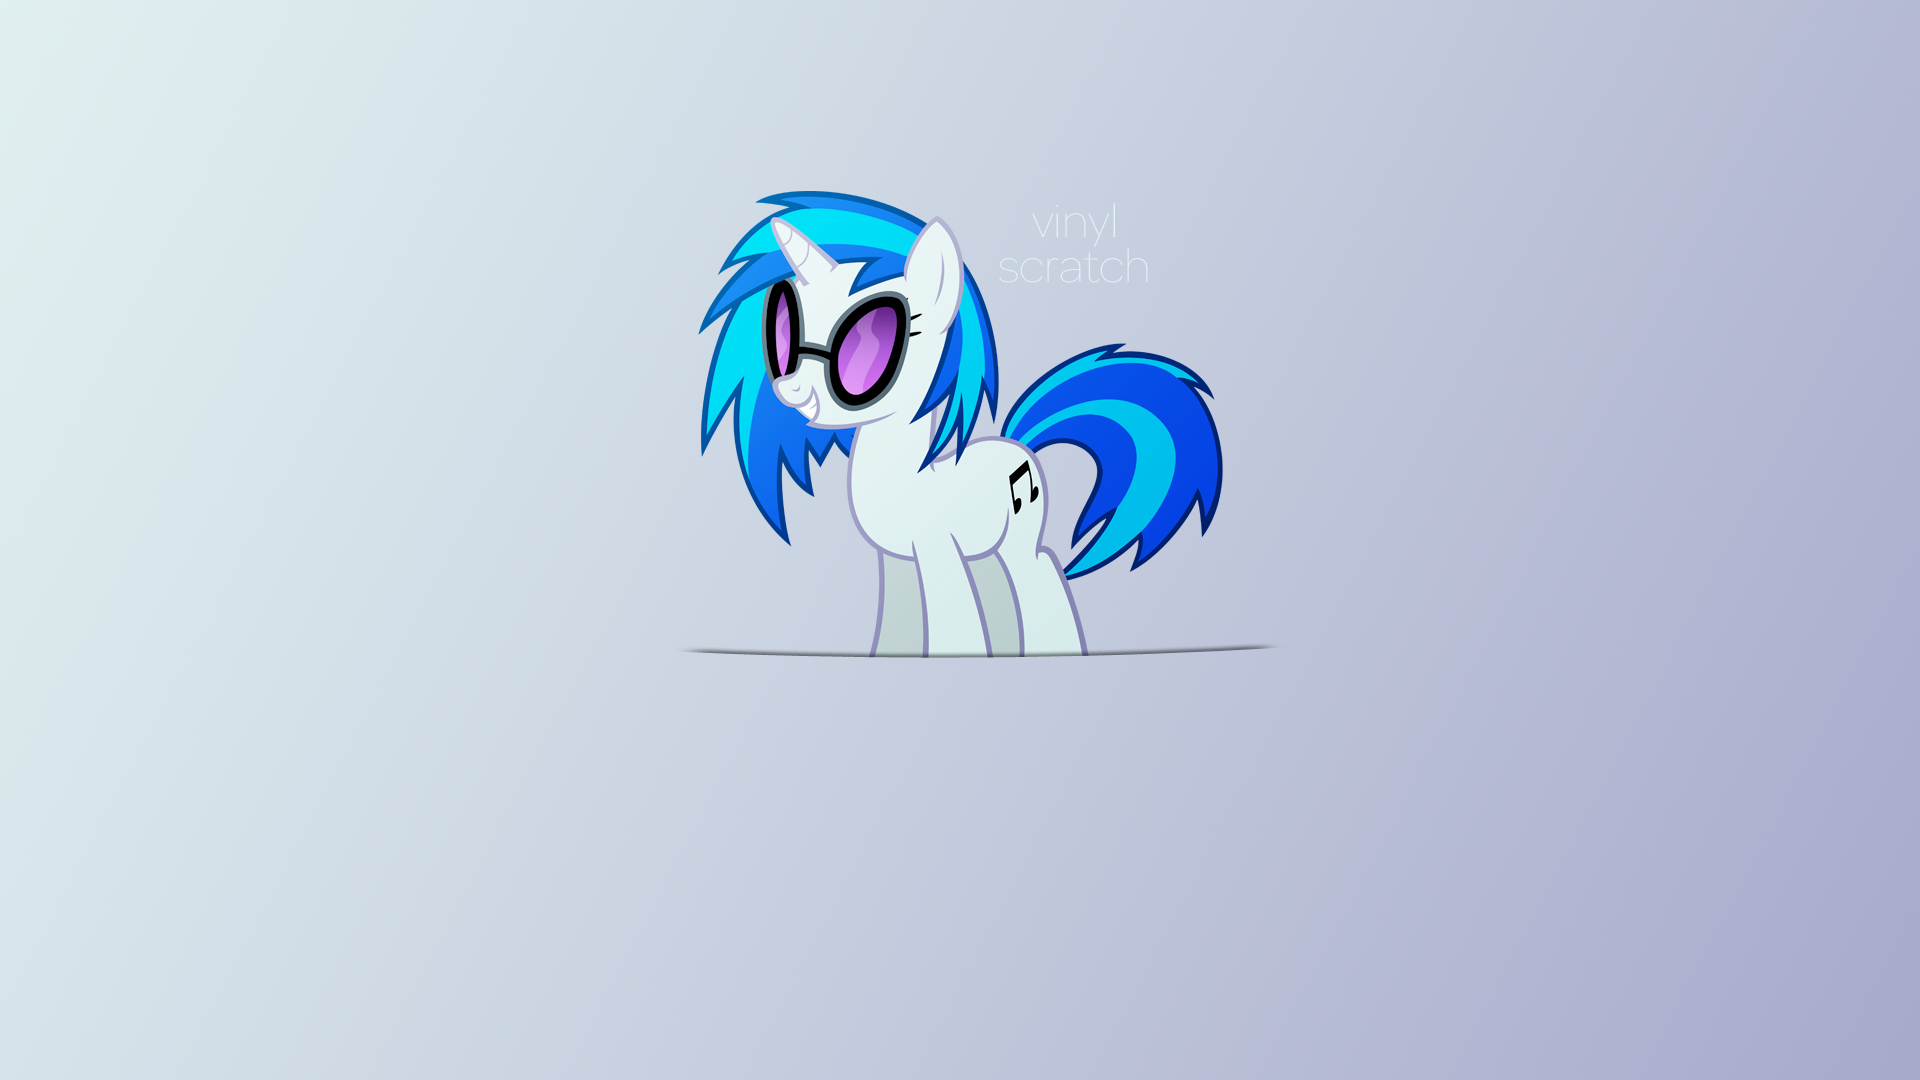 Vinyl Scratch Wallpaper -1920x1080- by gandodepth and MoongazePonies